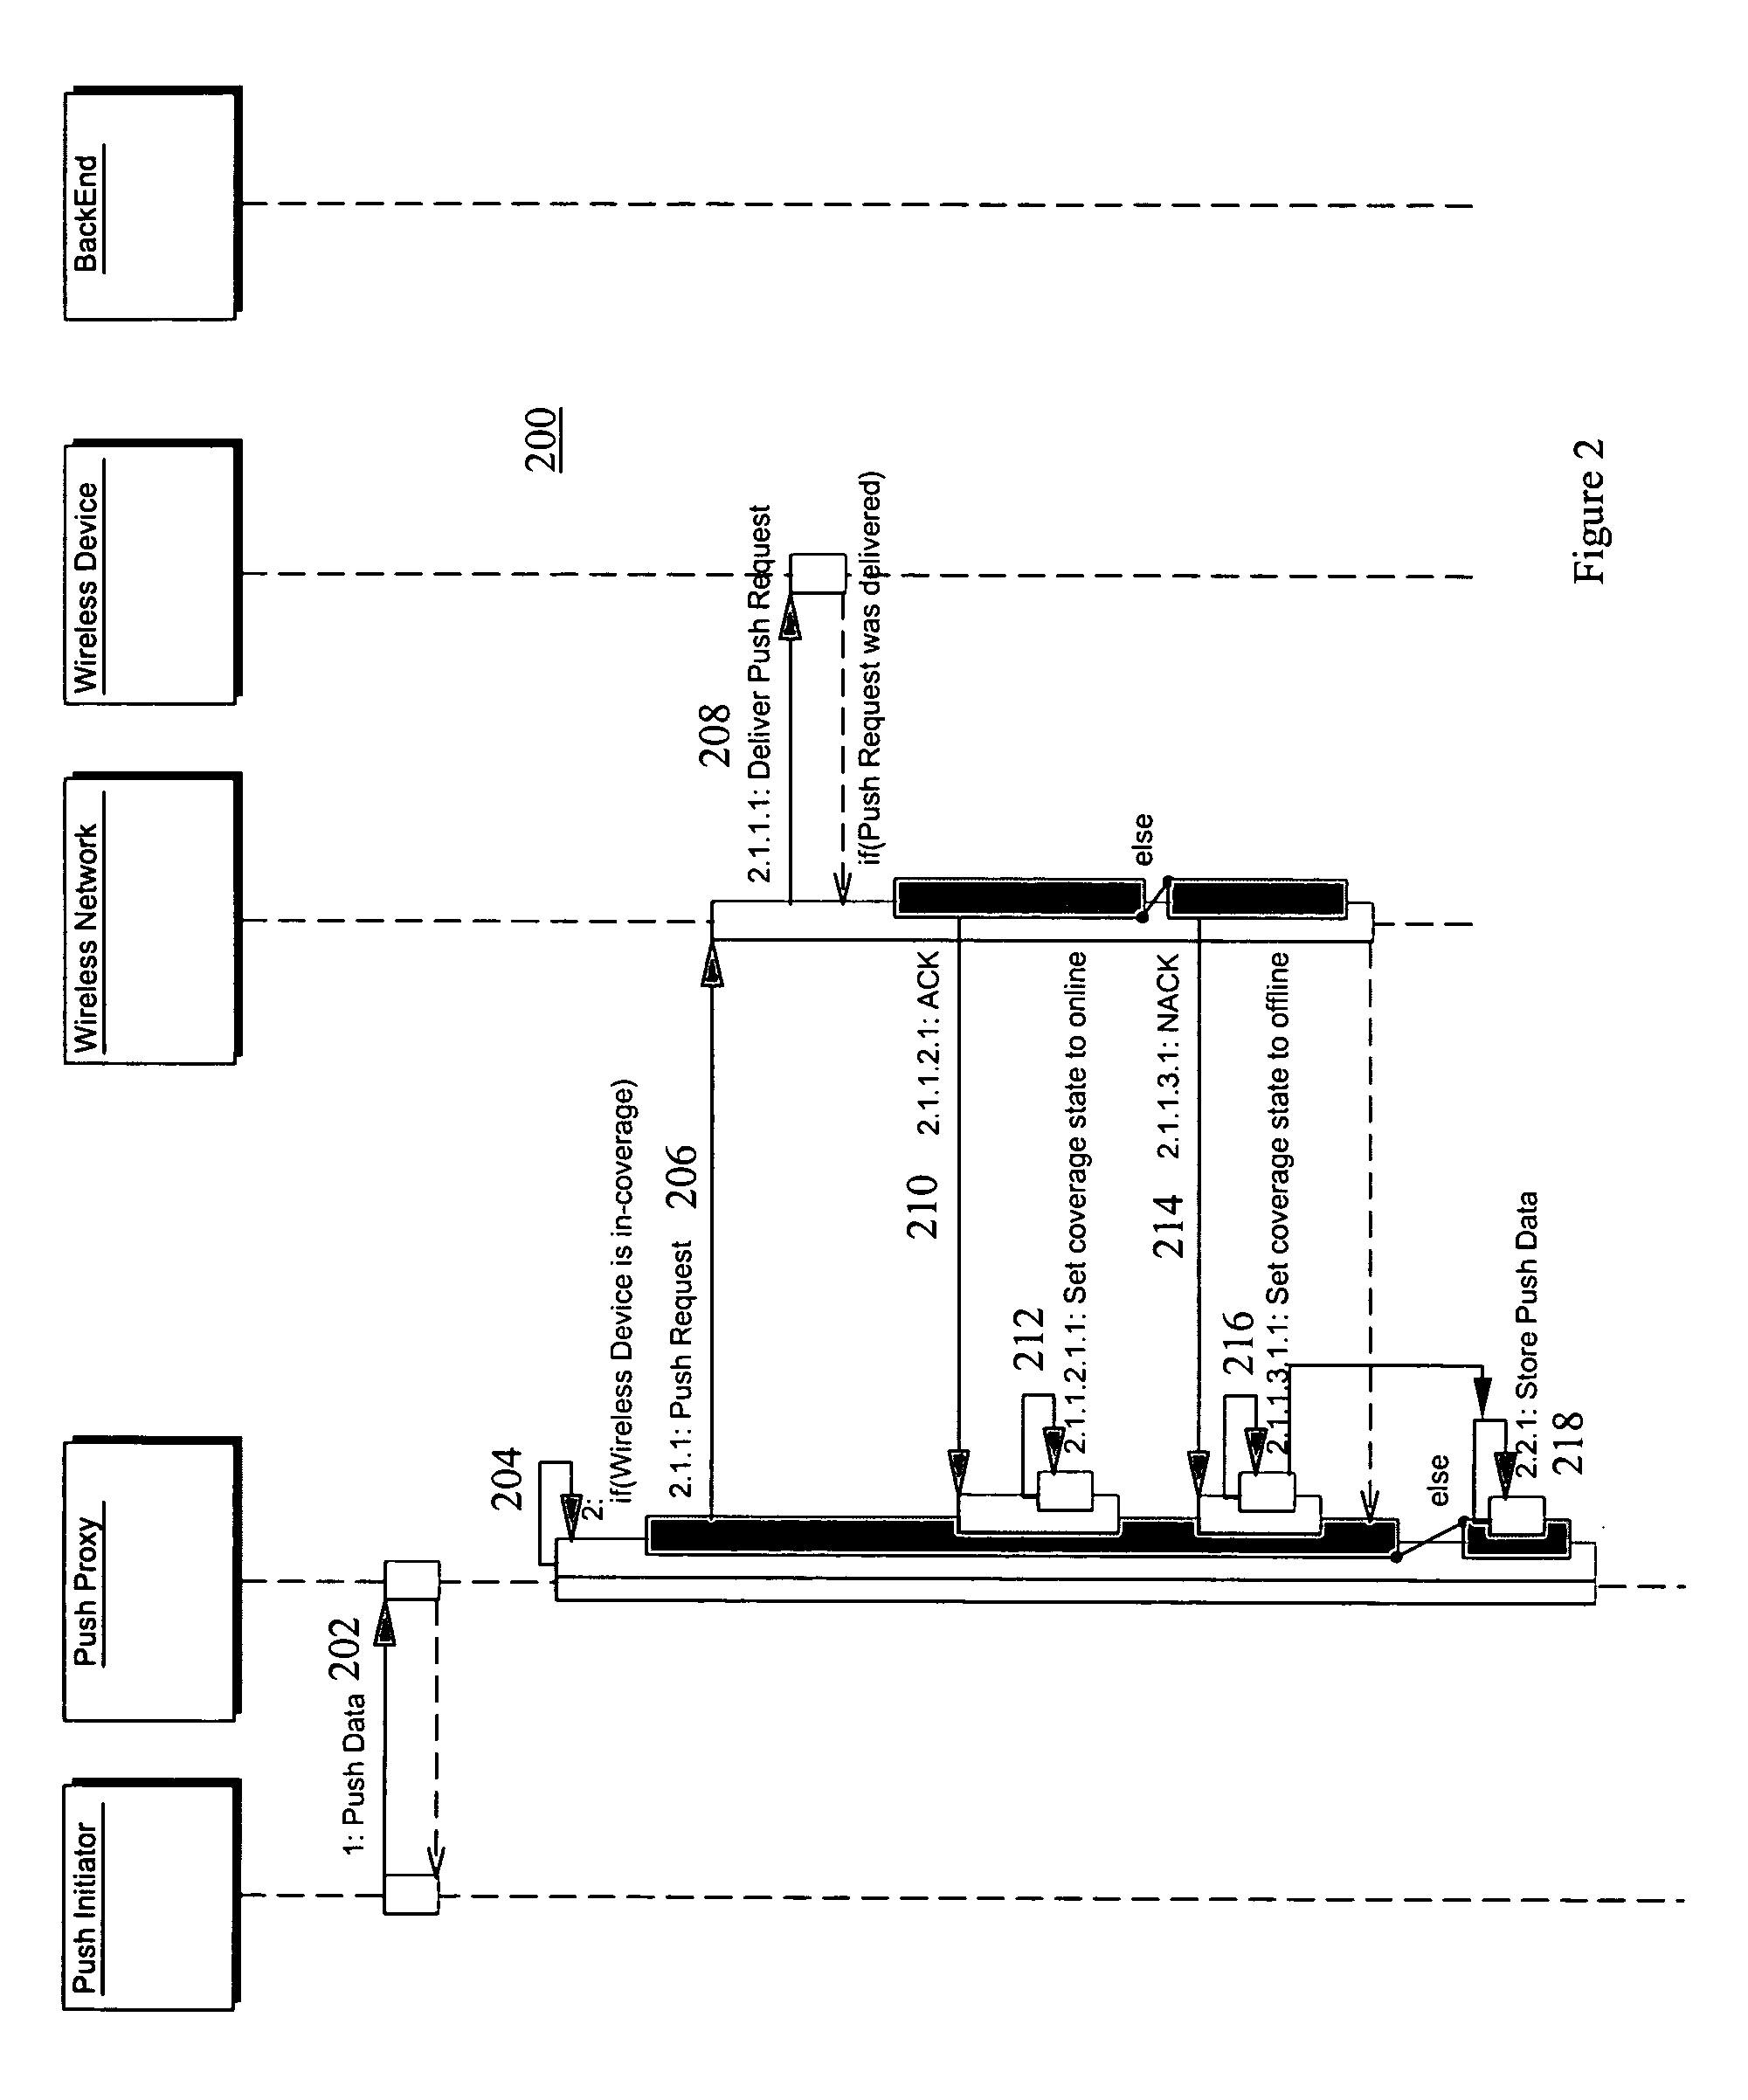 System and method for managing data to be pushed to a wireless device when the device may be outside of a coverage range